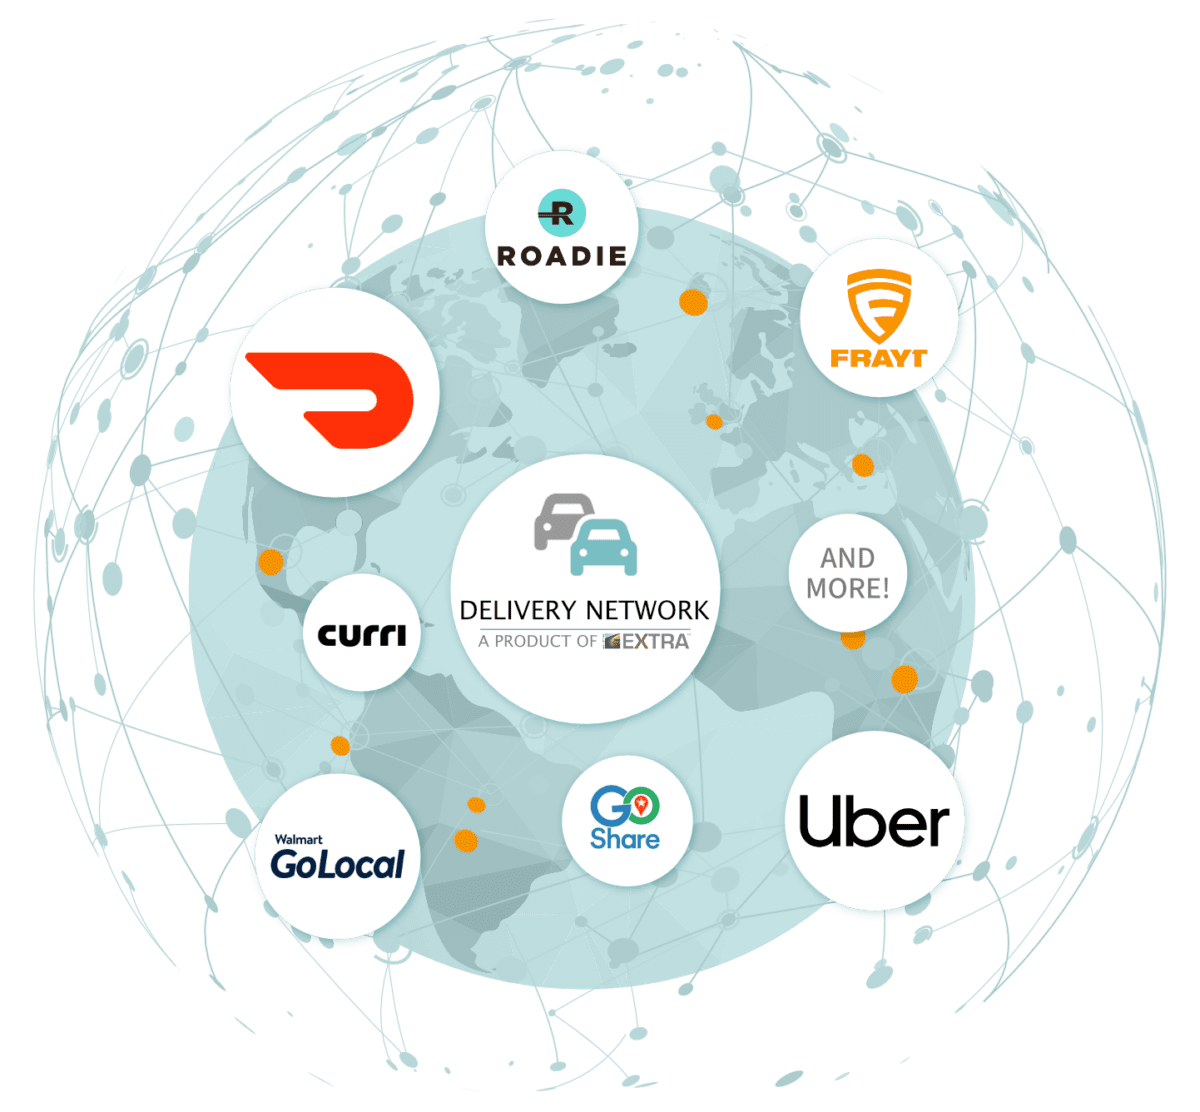 Globe network graphic of Delivery Network provider logos